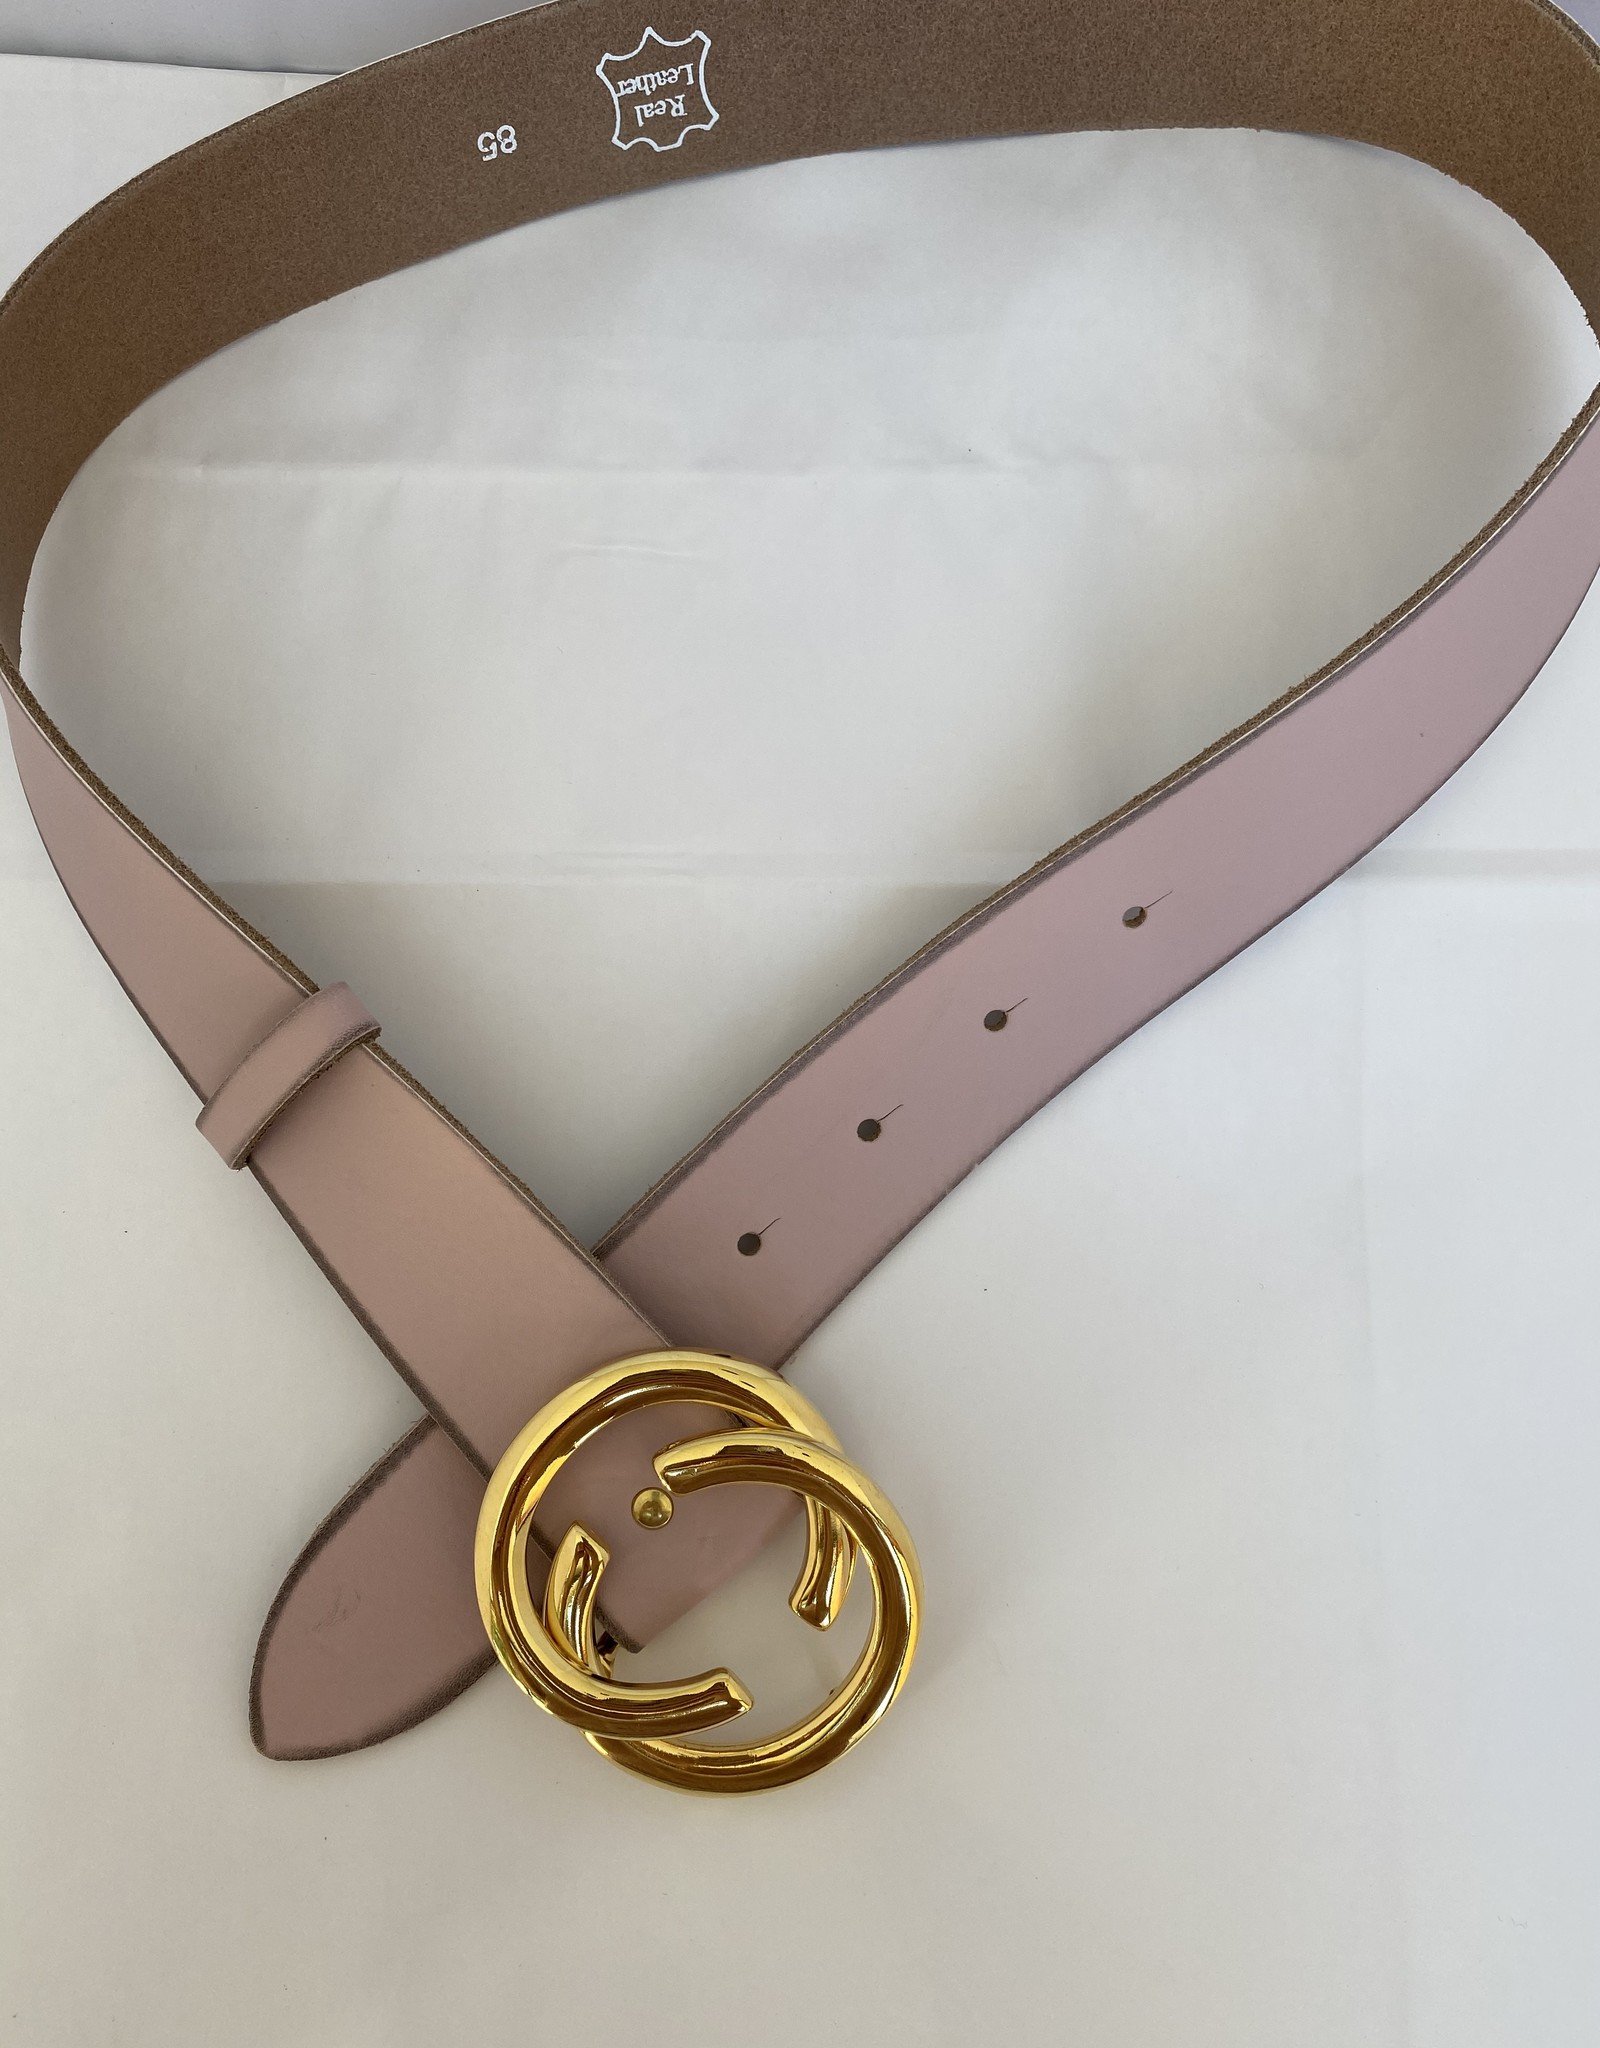 Wide leather belt with golden buckle.